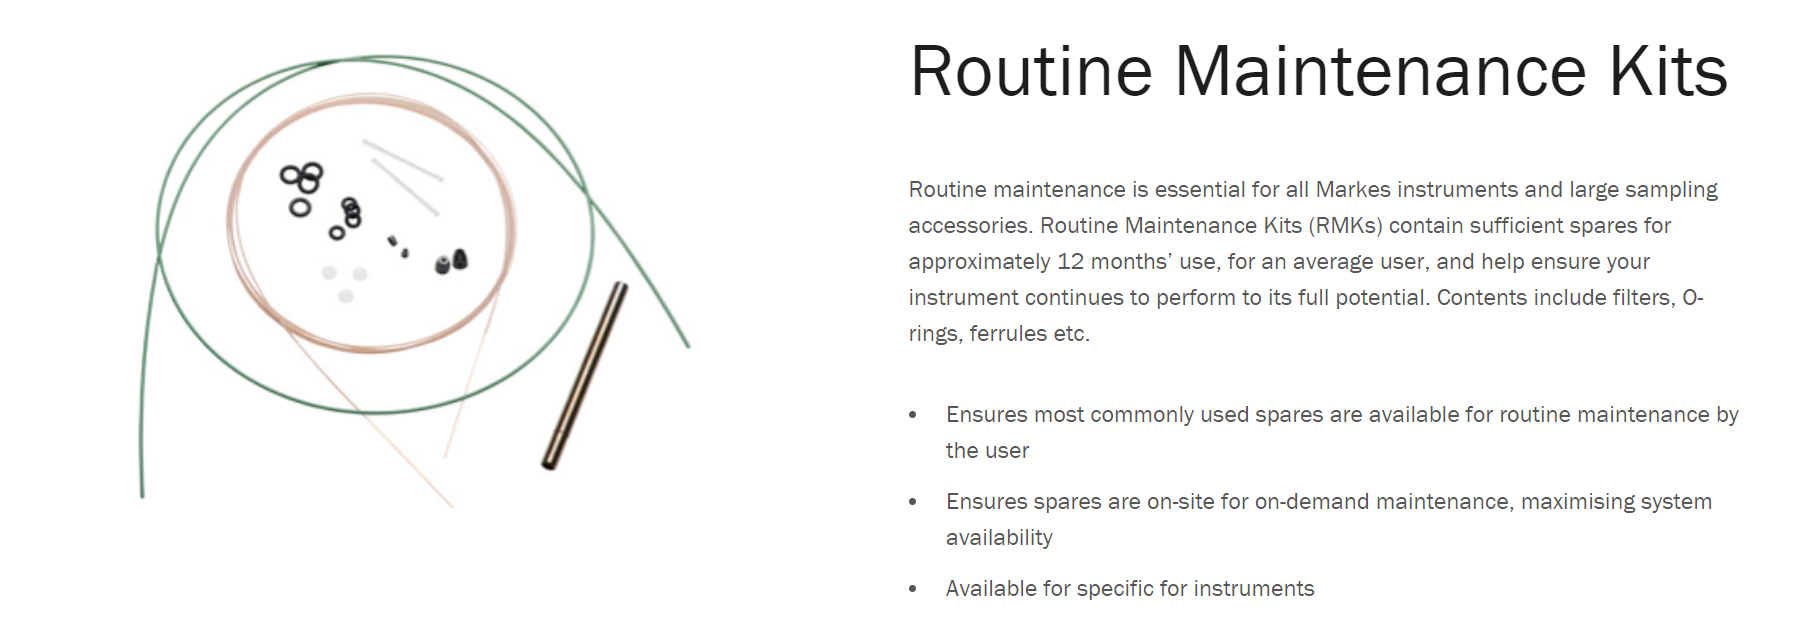 Routine maintenance kit for Markes instruments